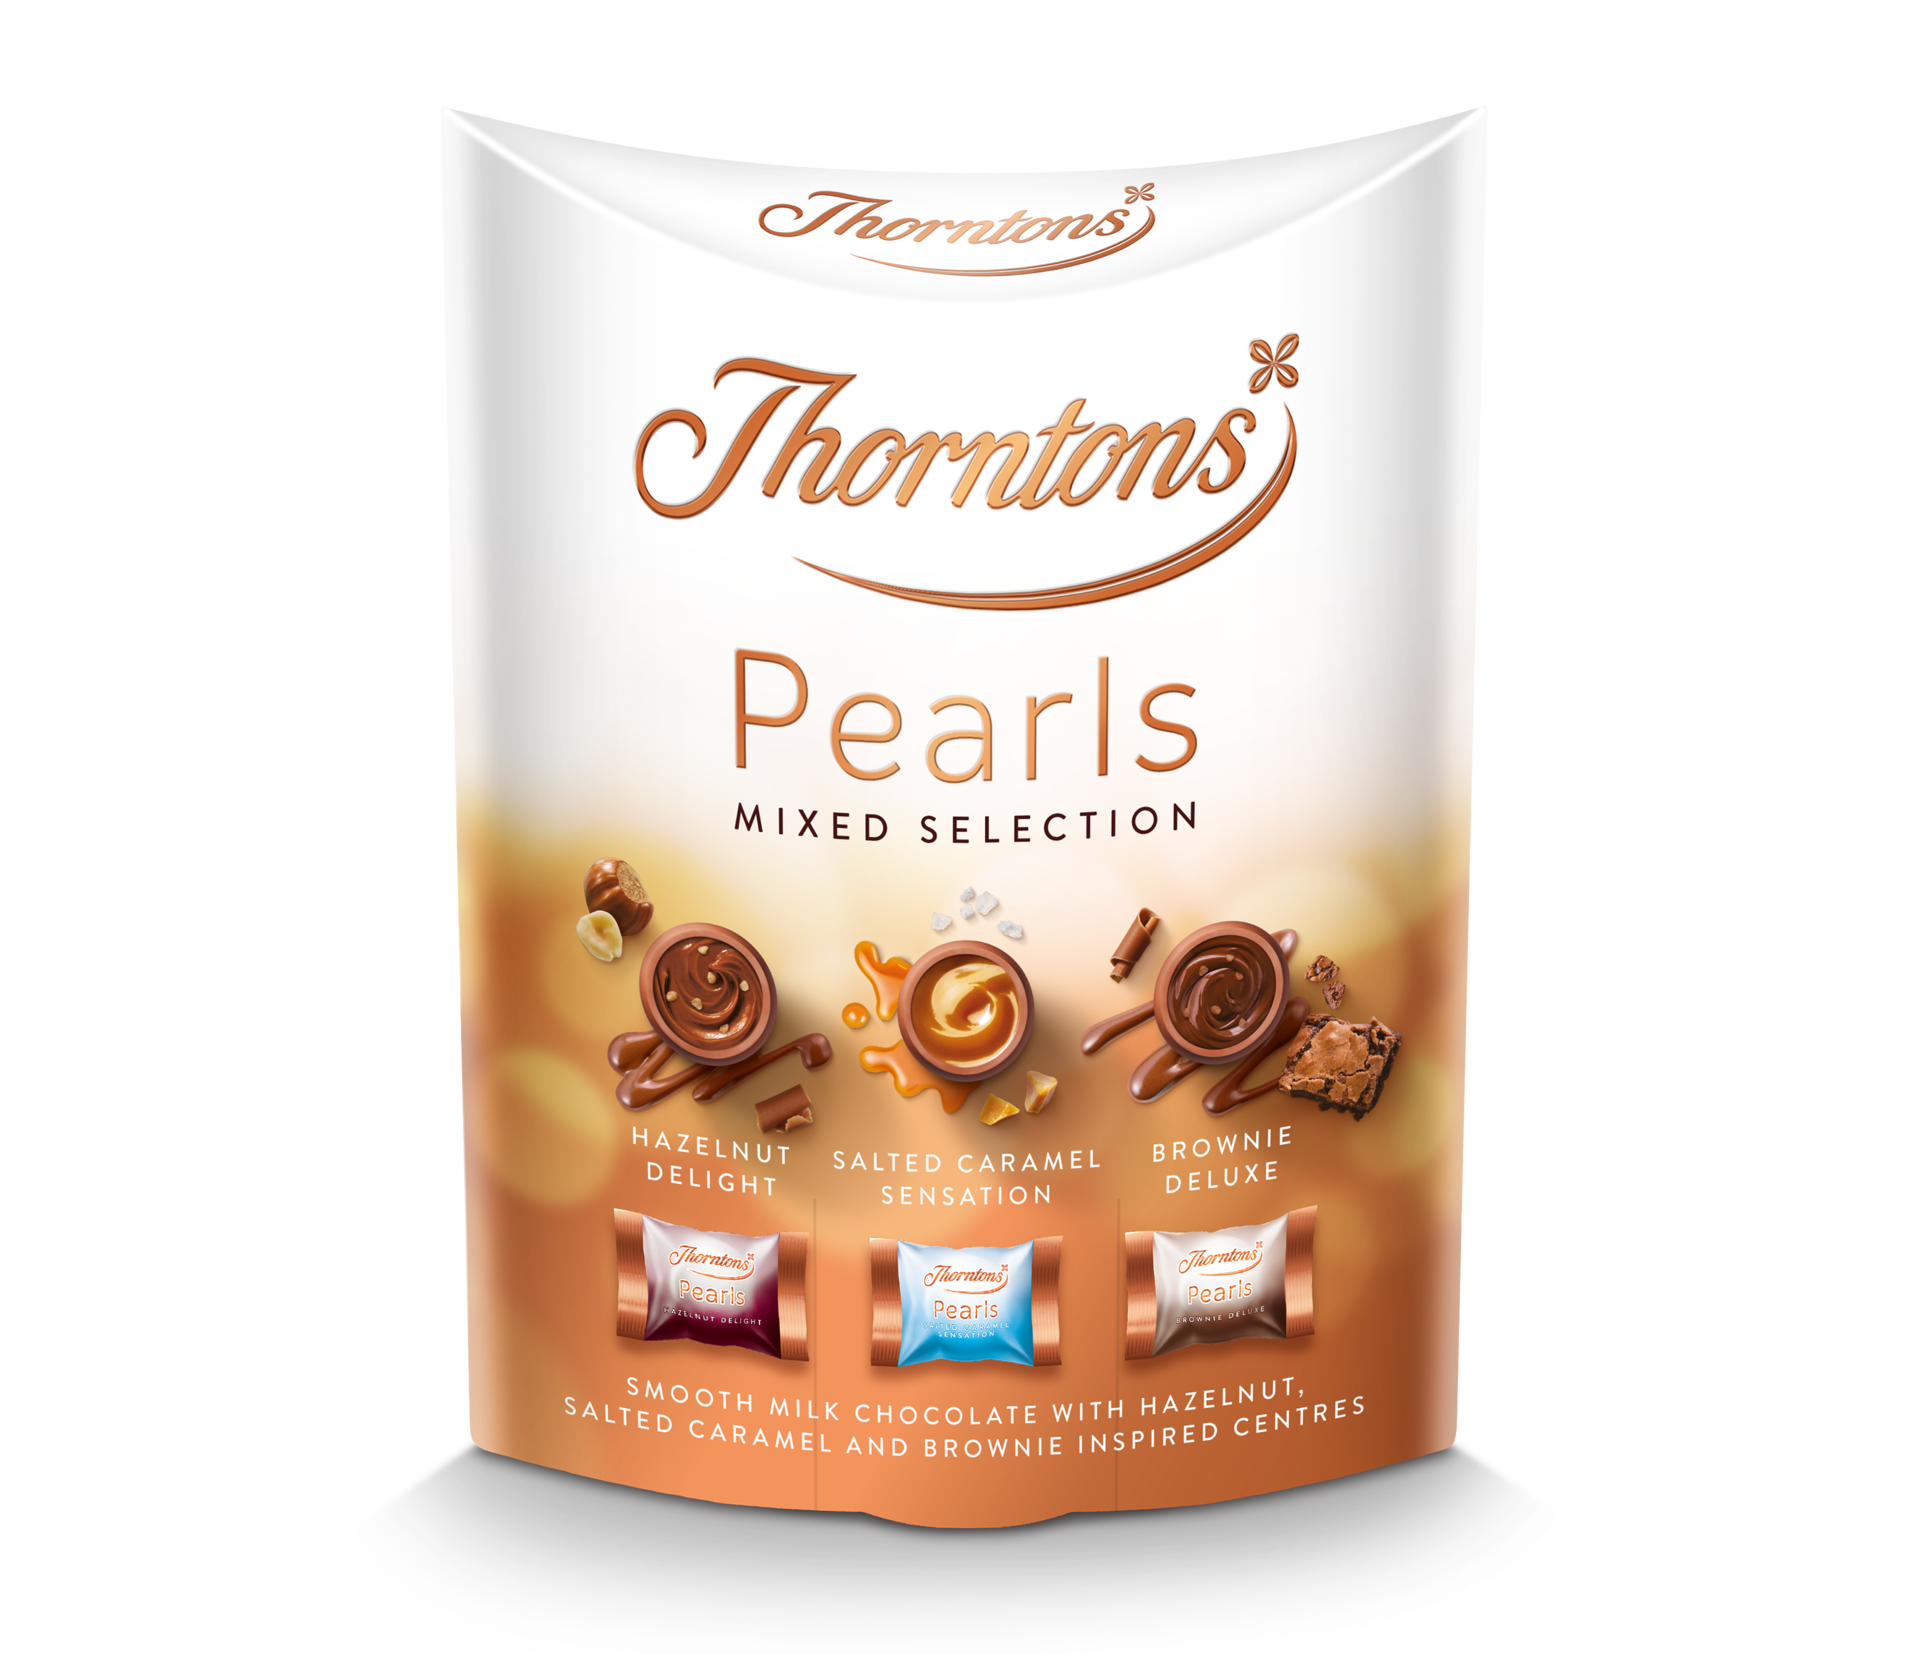 https://www.thorntons.com/medias/sys_master/images/h1a/hc5/8916767113246/77233280_main/77233280-main.png?resize=ProductGridComponent